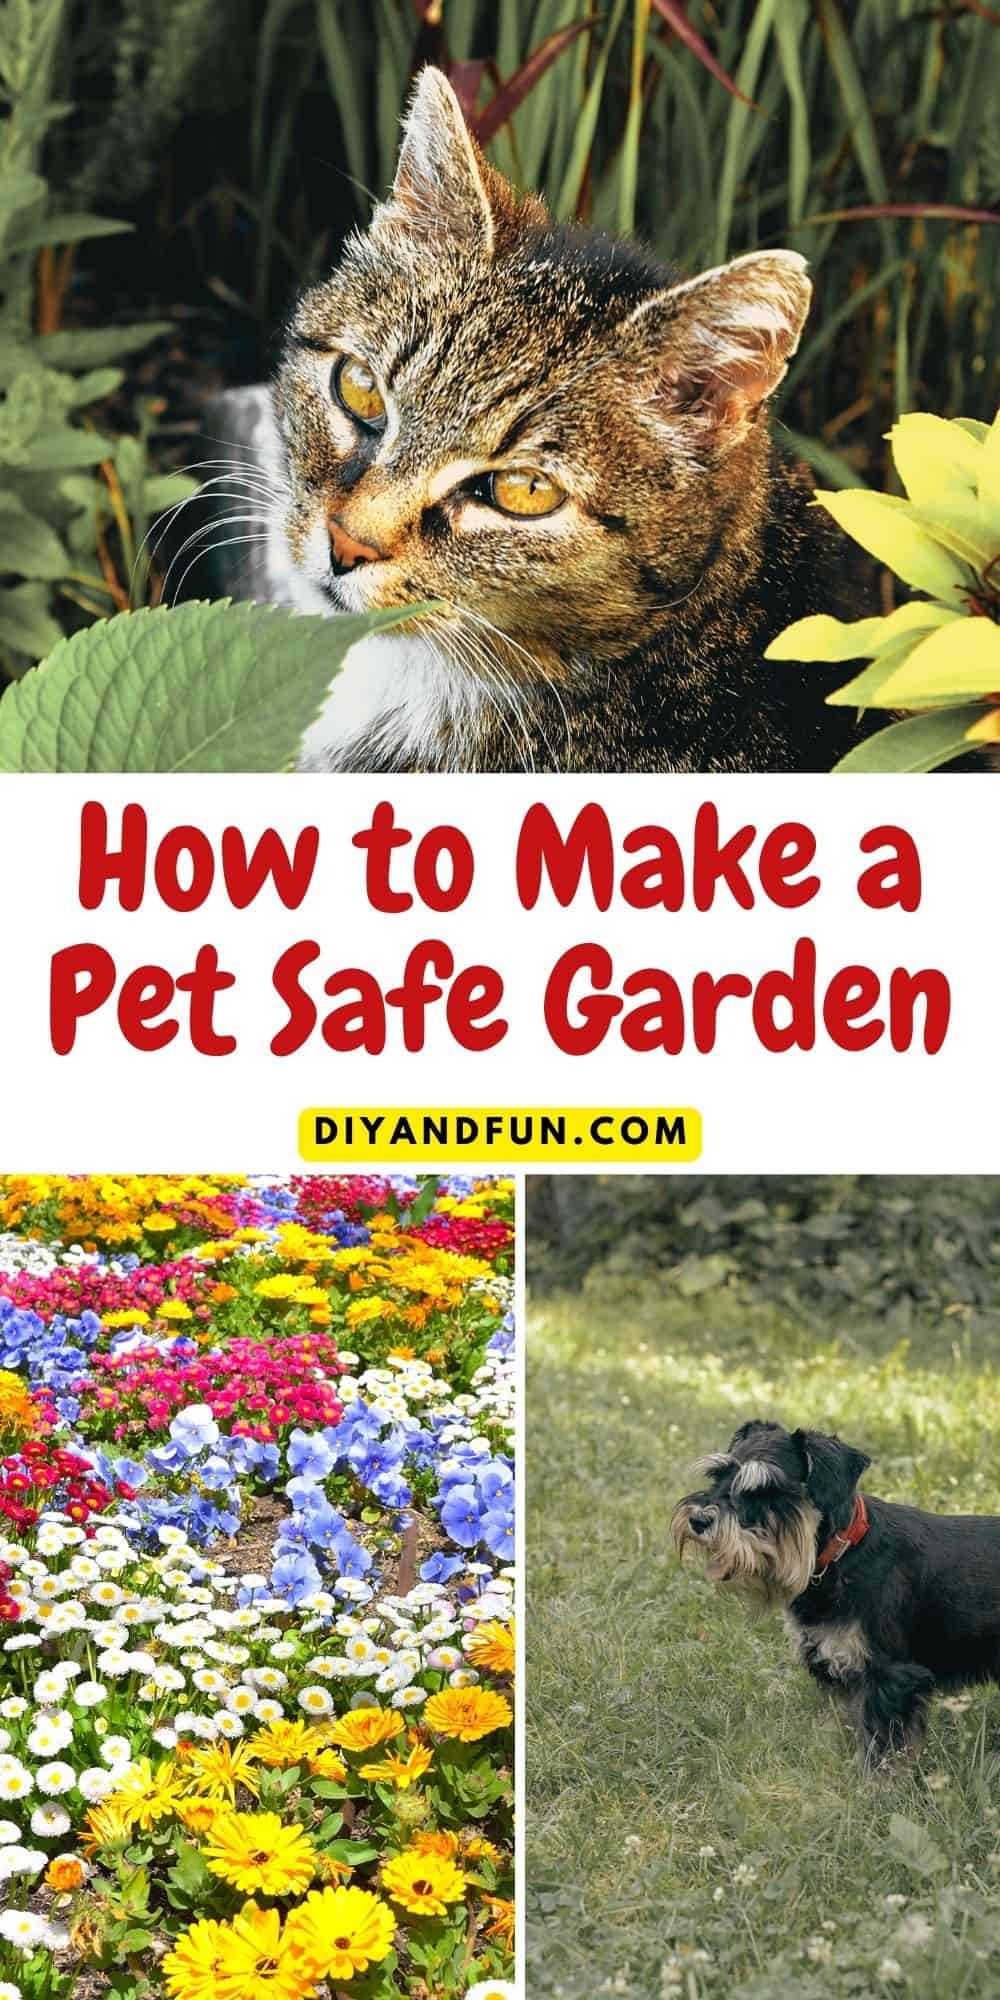 How to Make a Pet Safe Garden, a simple guide for making your backyard and garden safe for furry friends. Includes pet-safe plants.